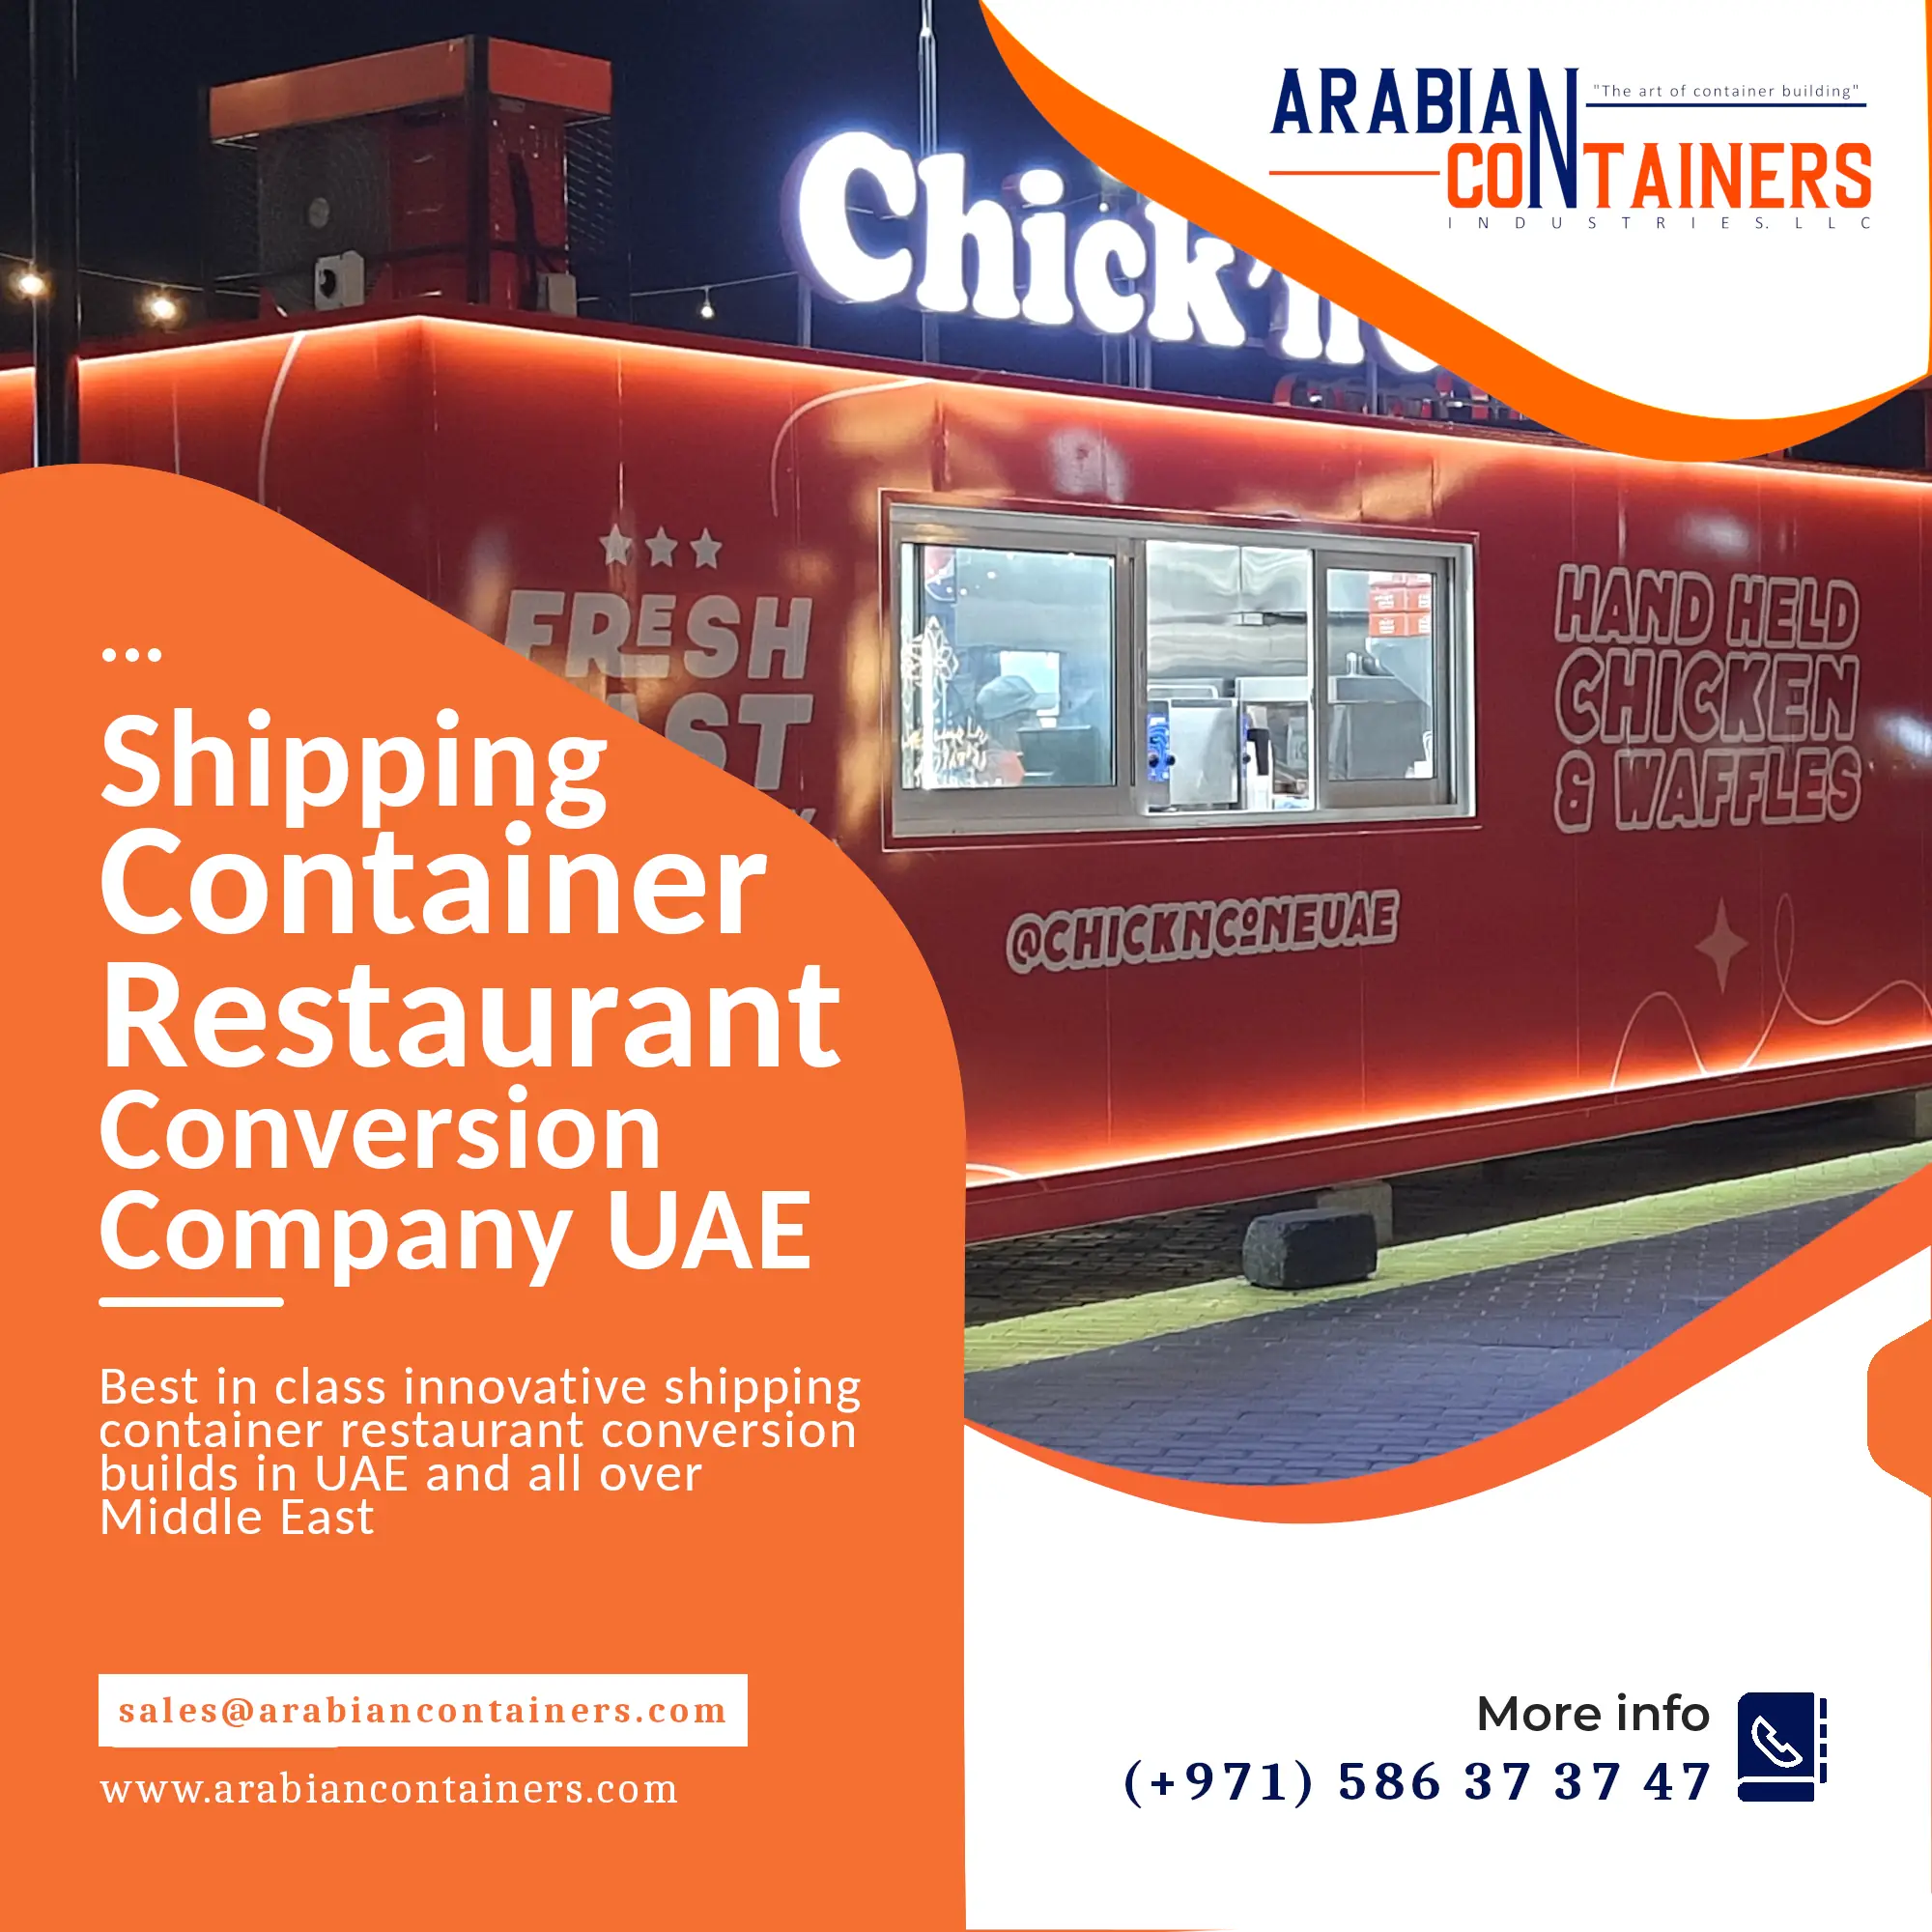 How to Make a Shipping Container Restaurant Conversion Build More Profitable in UAE